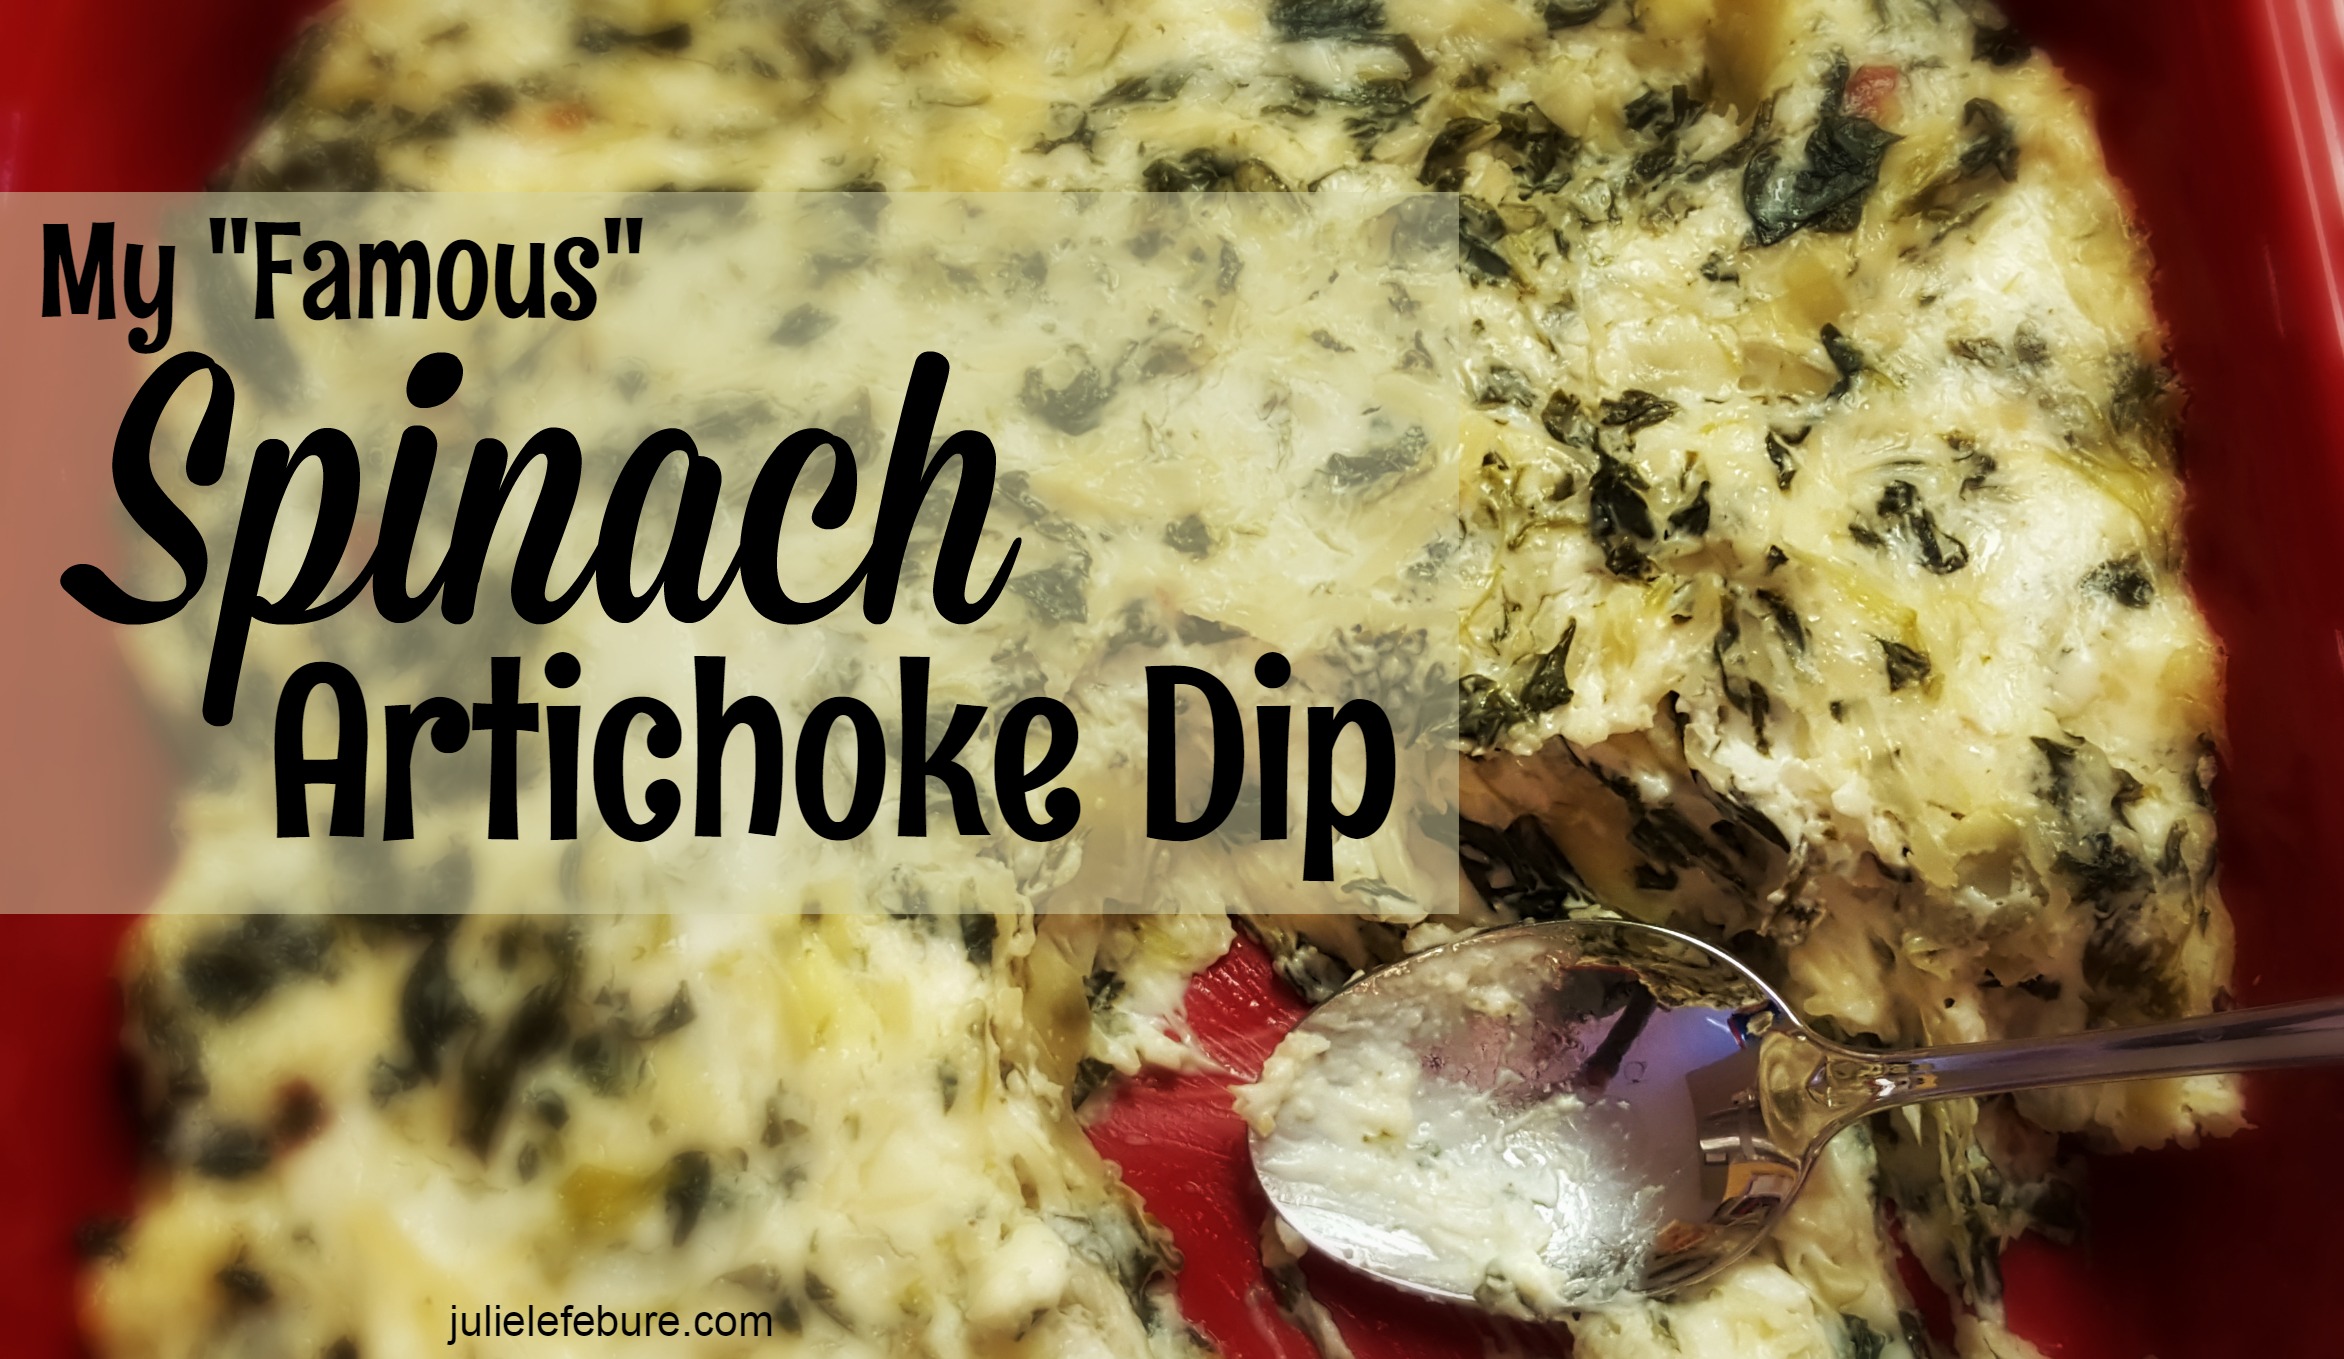 My “Famous” Spinach Artichoke Dip